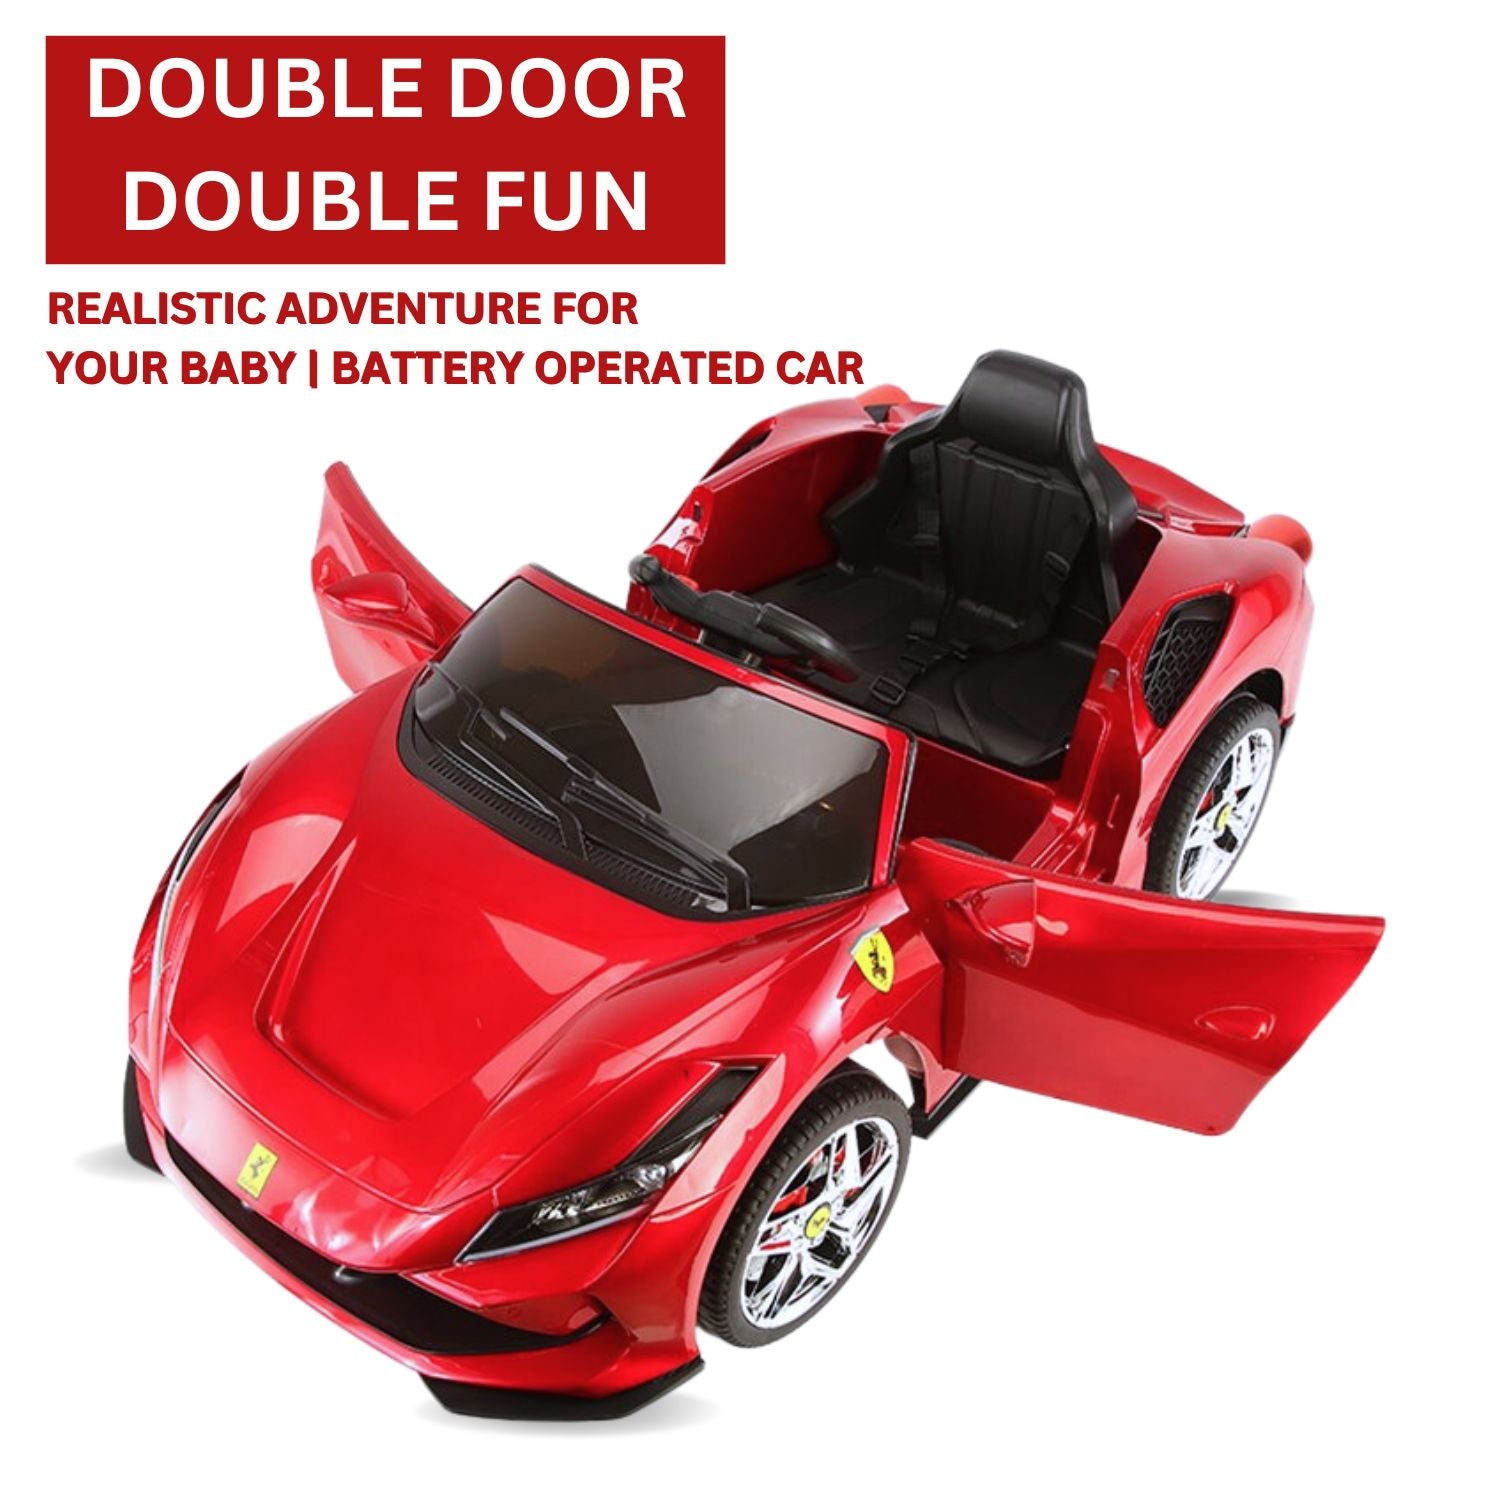 Baby Moo Ferrari F8 12V Battery Operated Ride On Car for Kids | Electric Car with Remote Control | Rechargeable Battery-Powered Toy with LED Lights, Music & USB Port | Age 2-8 - Red